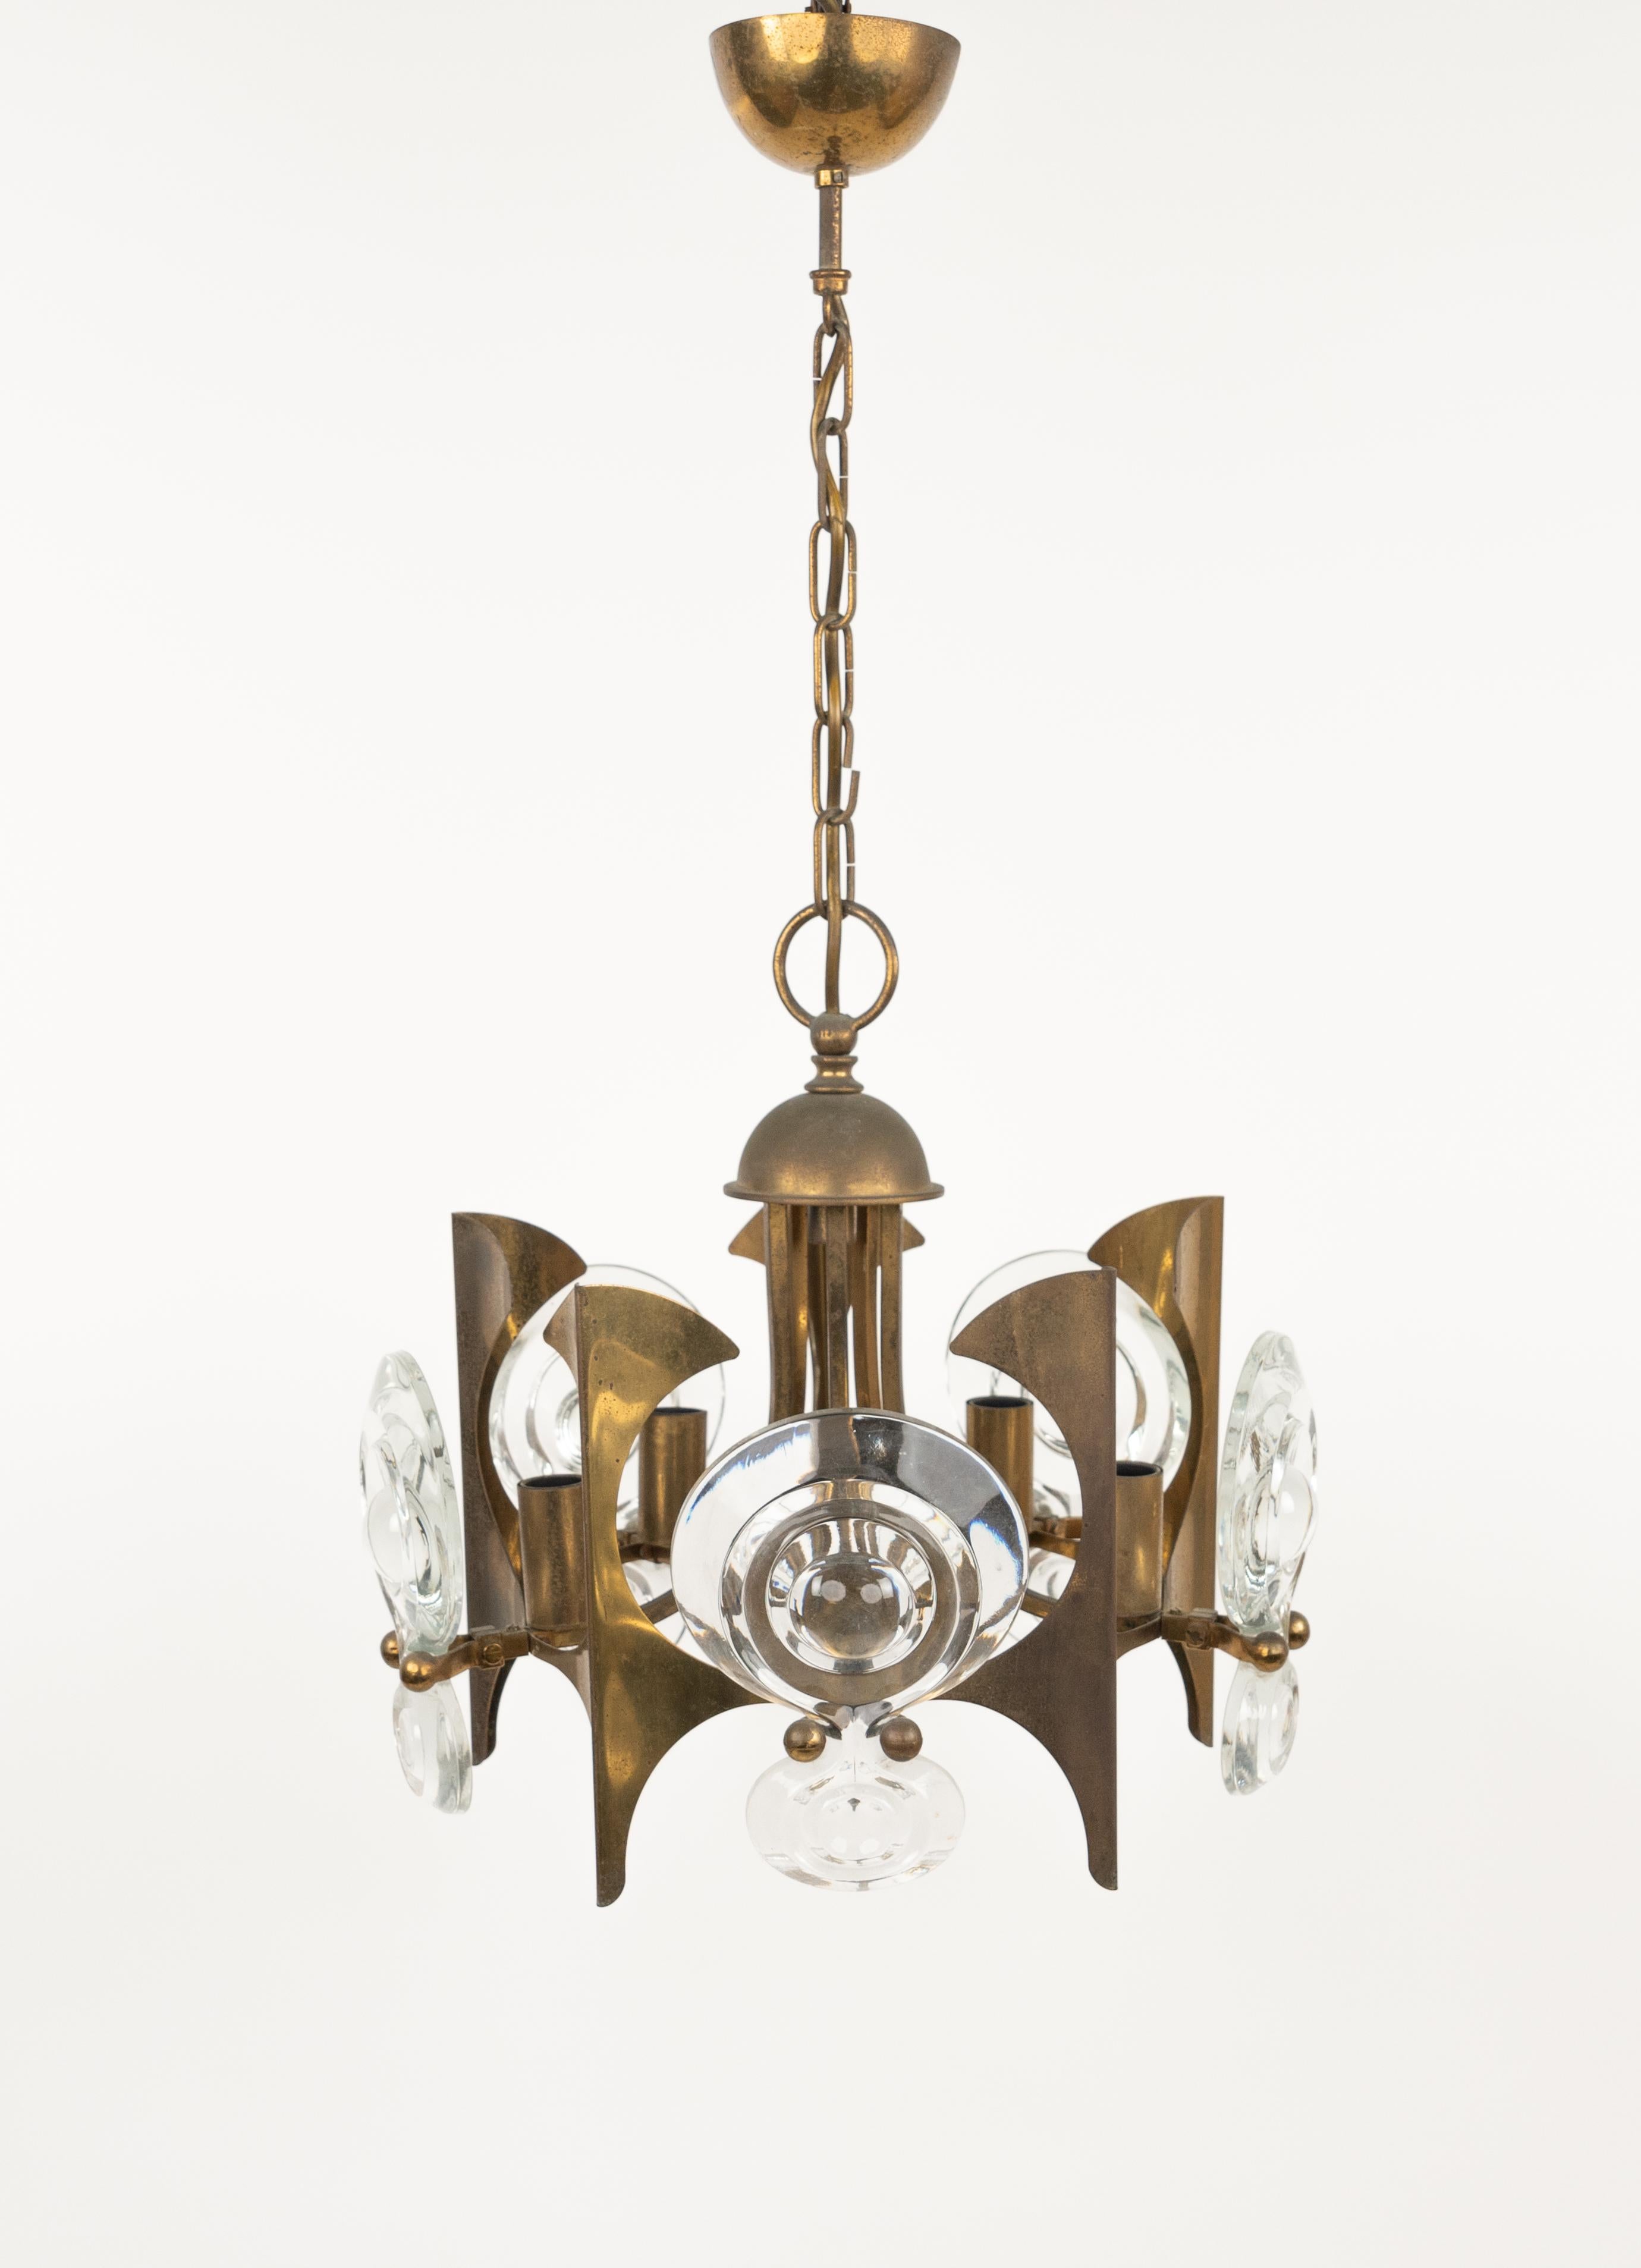 Italian Midcentury Chandelier Brass and Glass by Oscar Torlasco, Italy 1960s For Sale